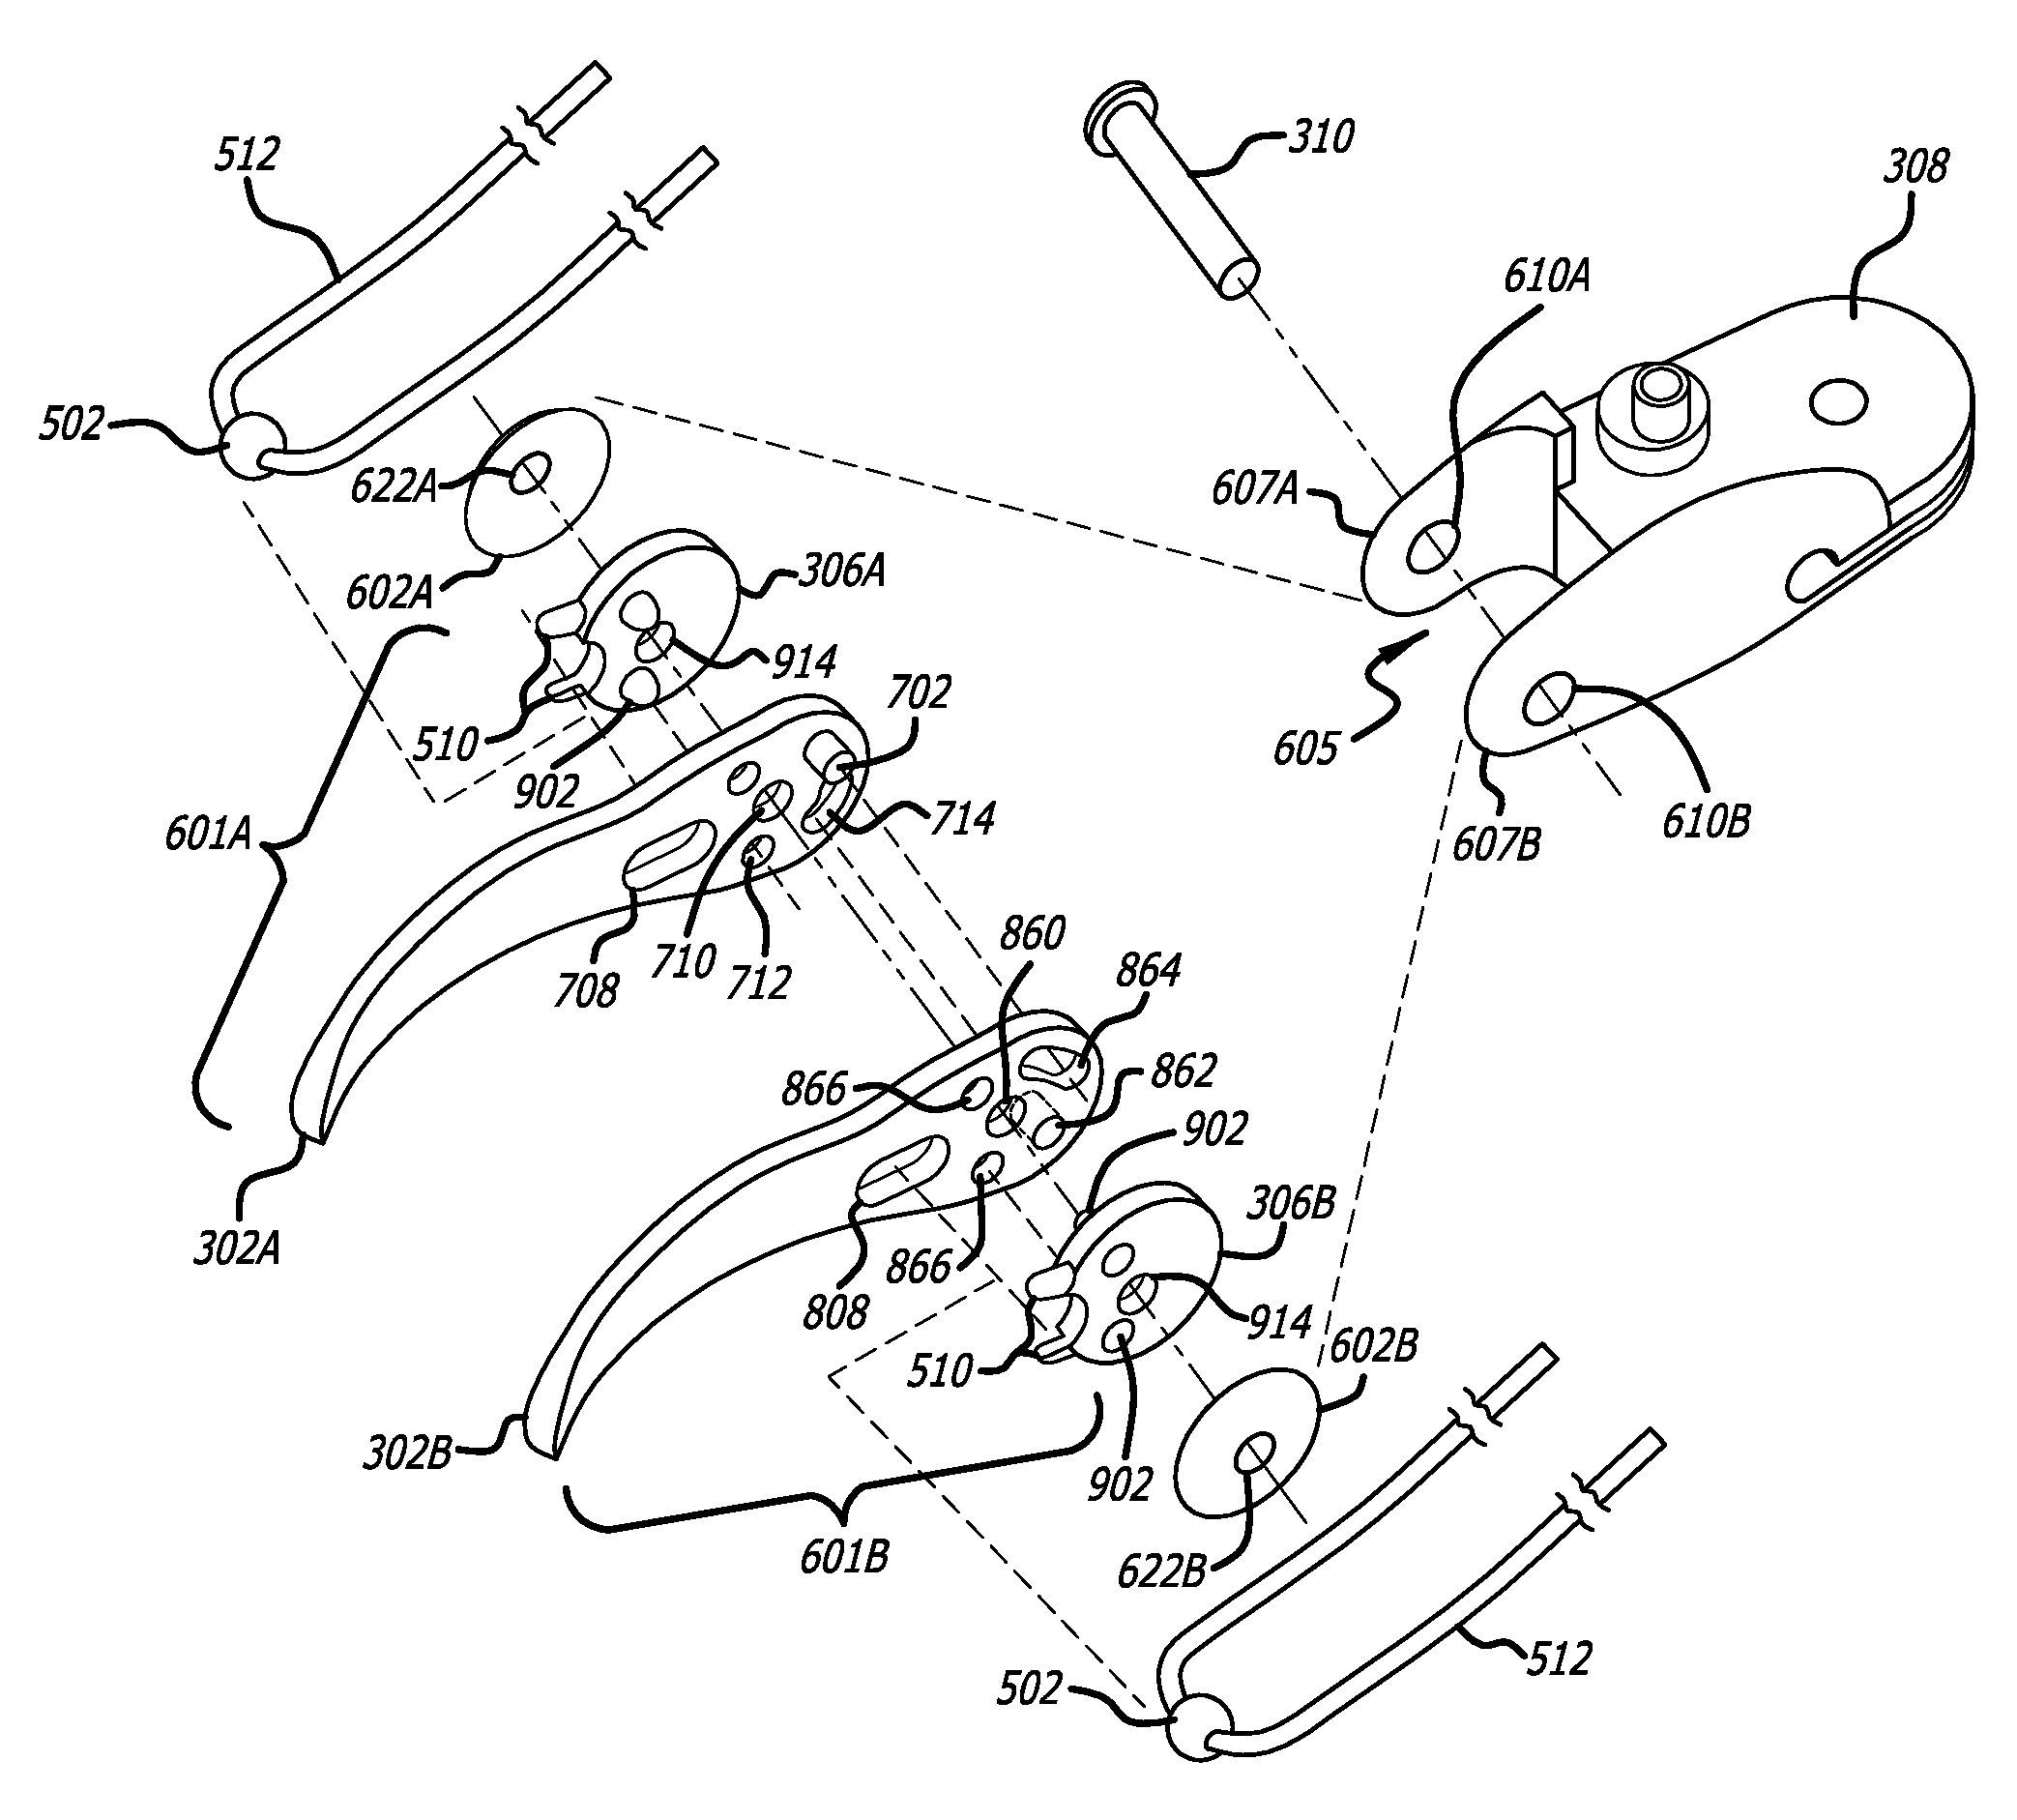 Two-piece end-effectors for robotic surgical tools